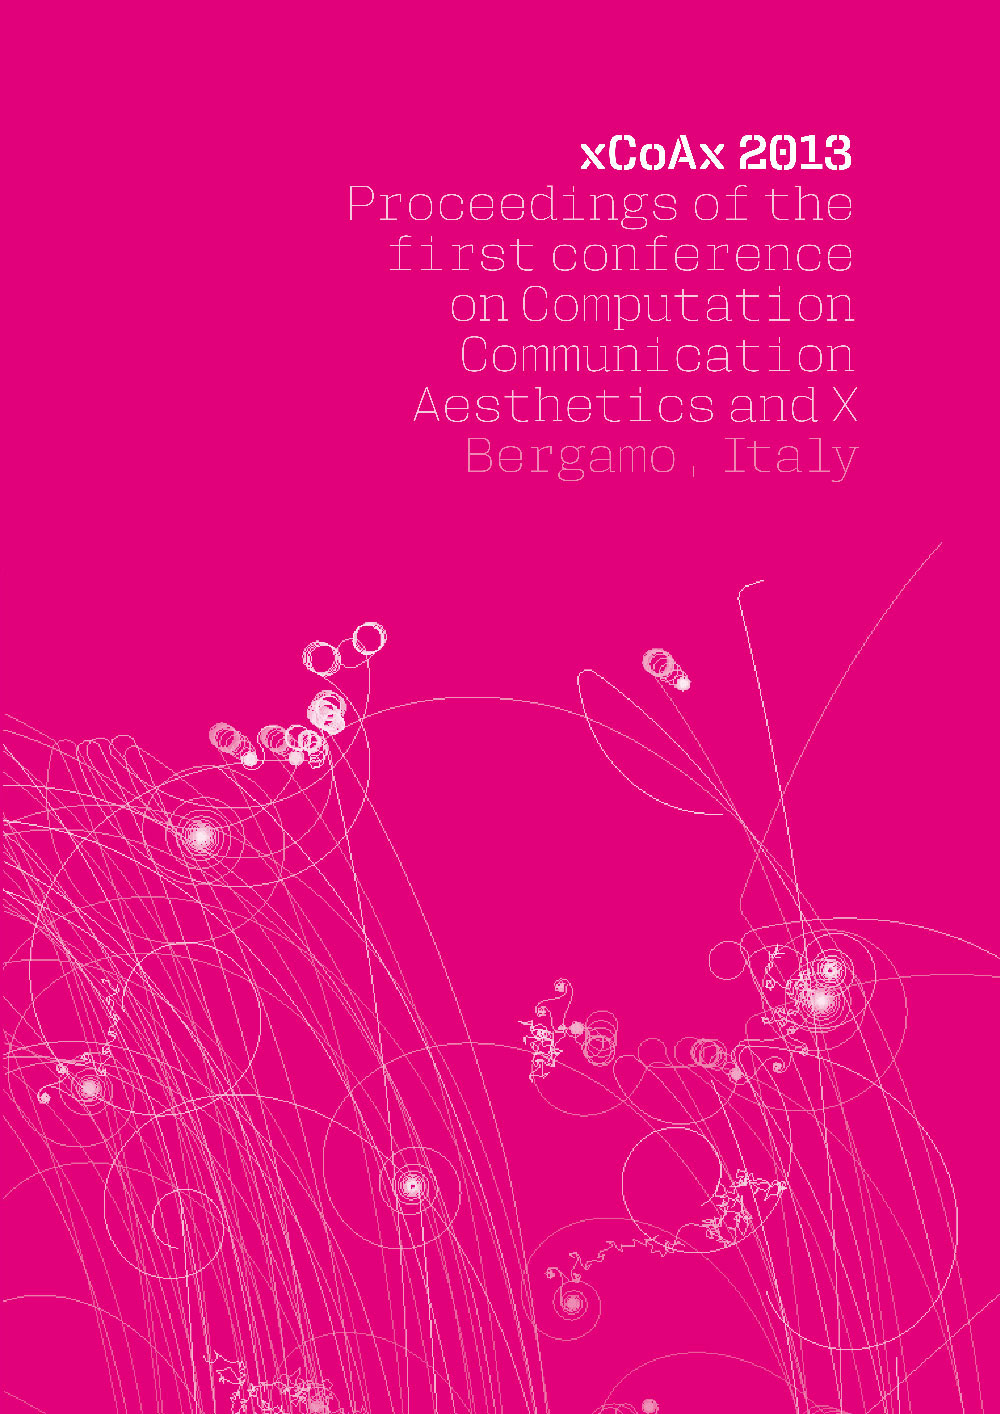 Cover of the 2014 Proceedings